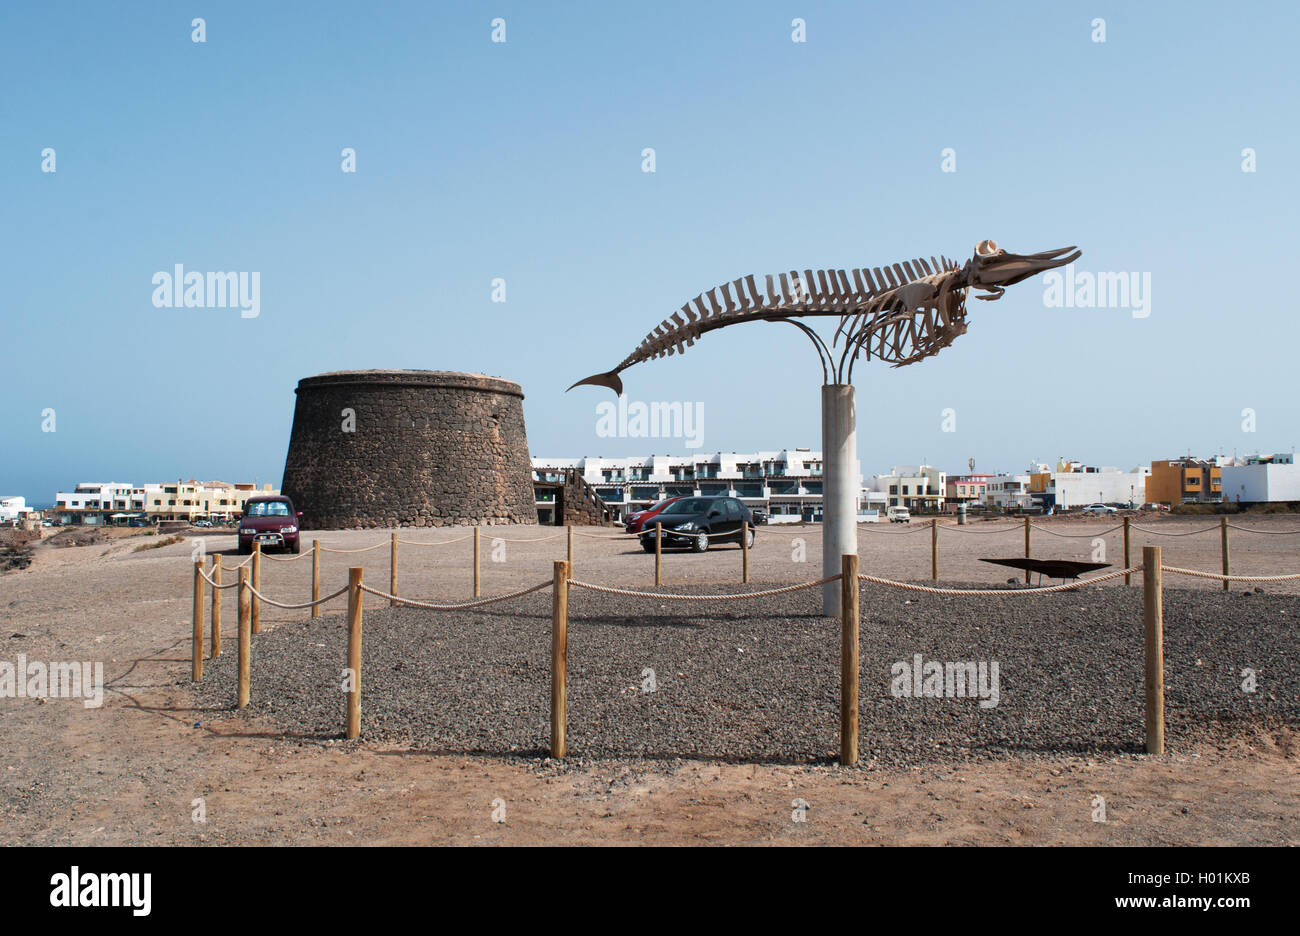 El Cotillo, Fuerteventura, Canary Islands, North Africa: a whale skeleton with El Toston Castle , a watchtower built for defense in the 18th century Stock Photo